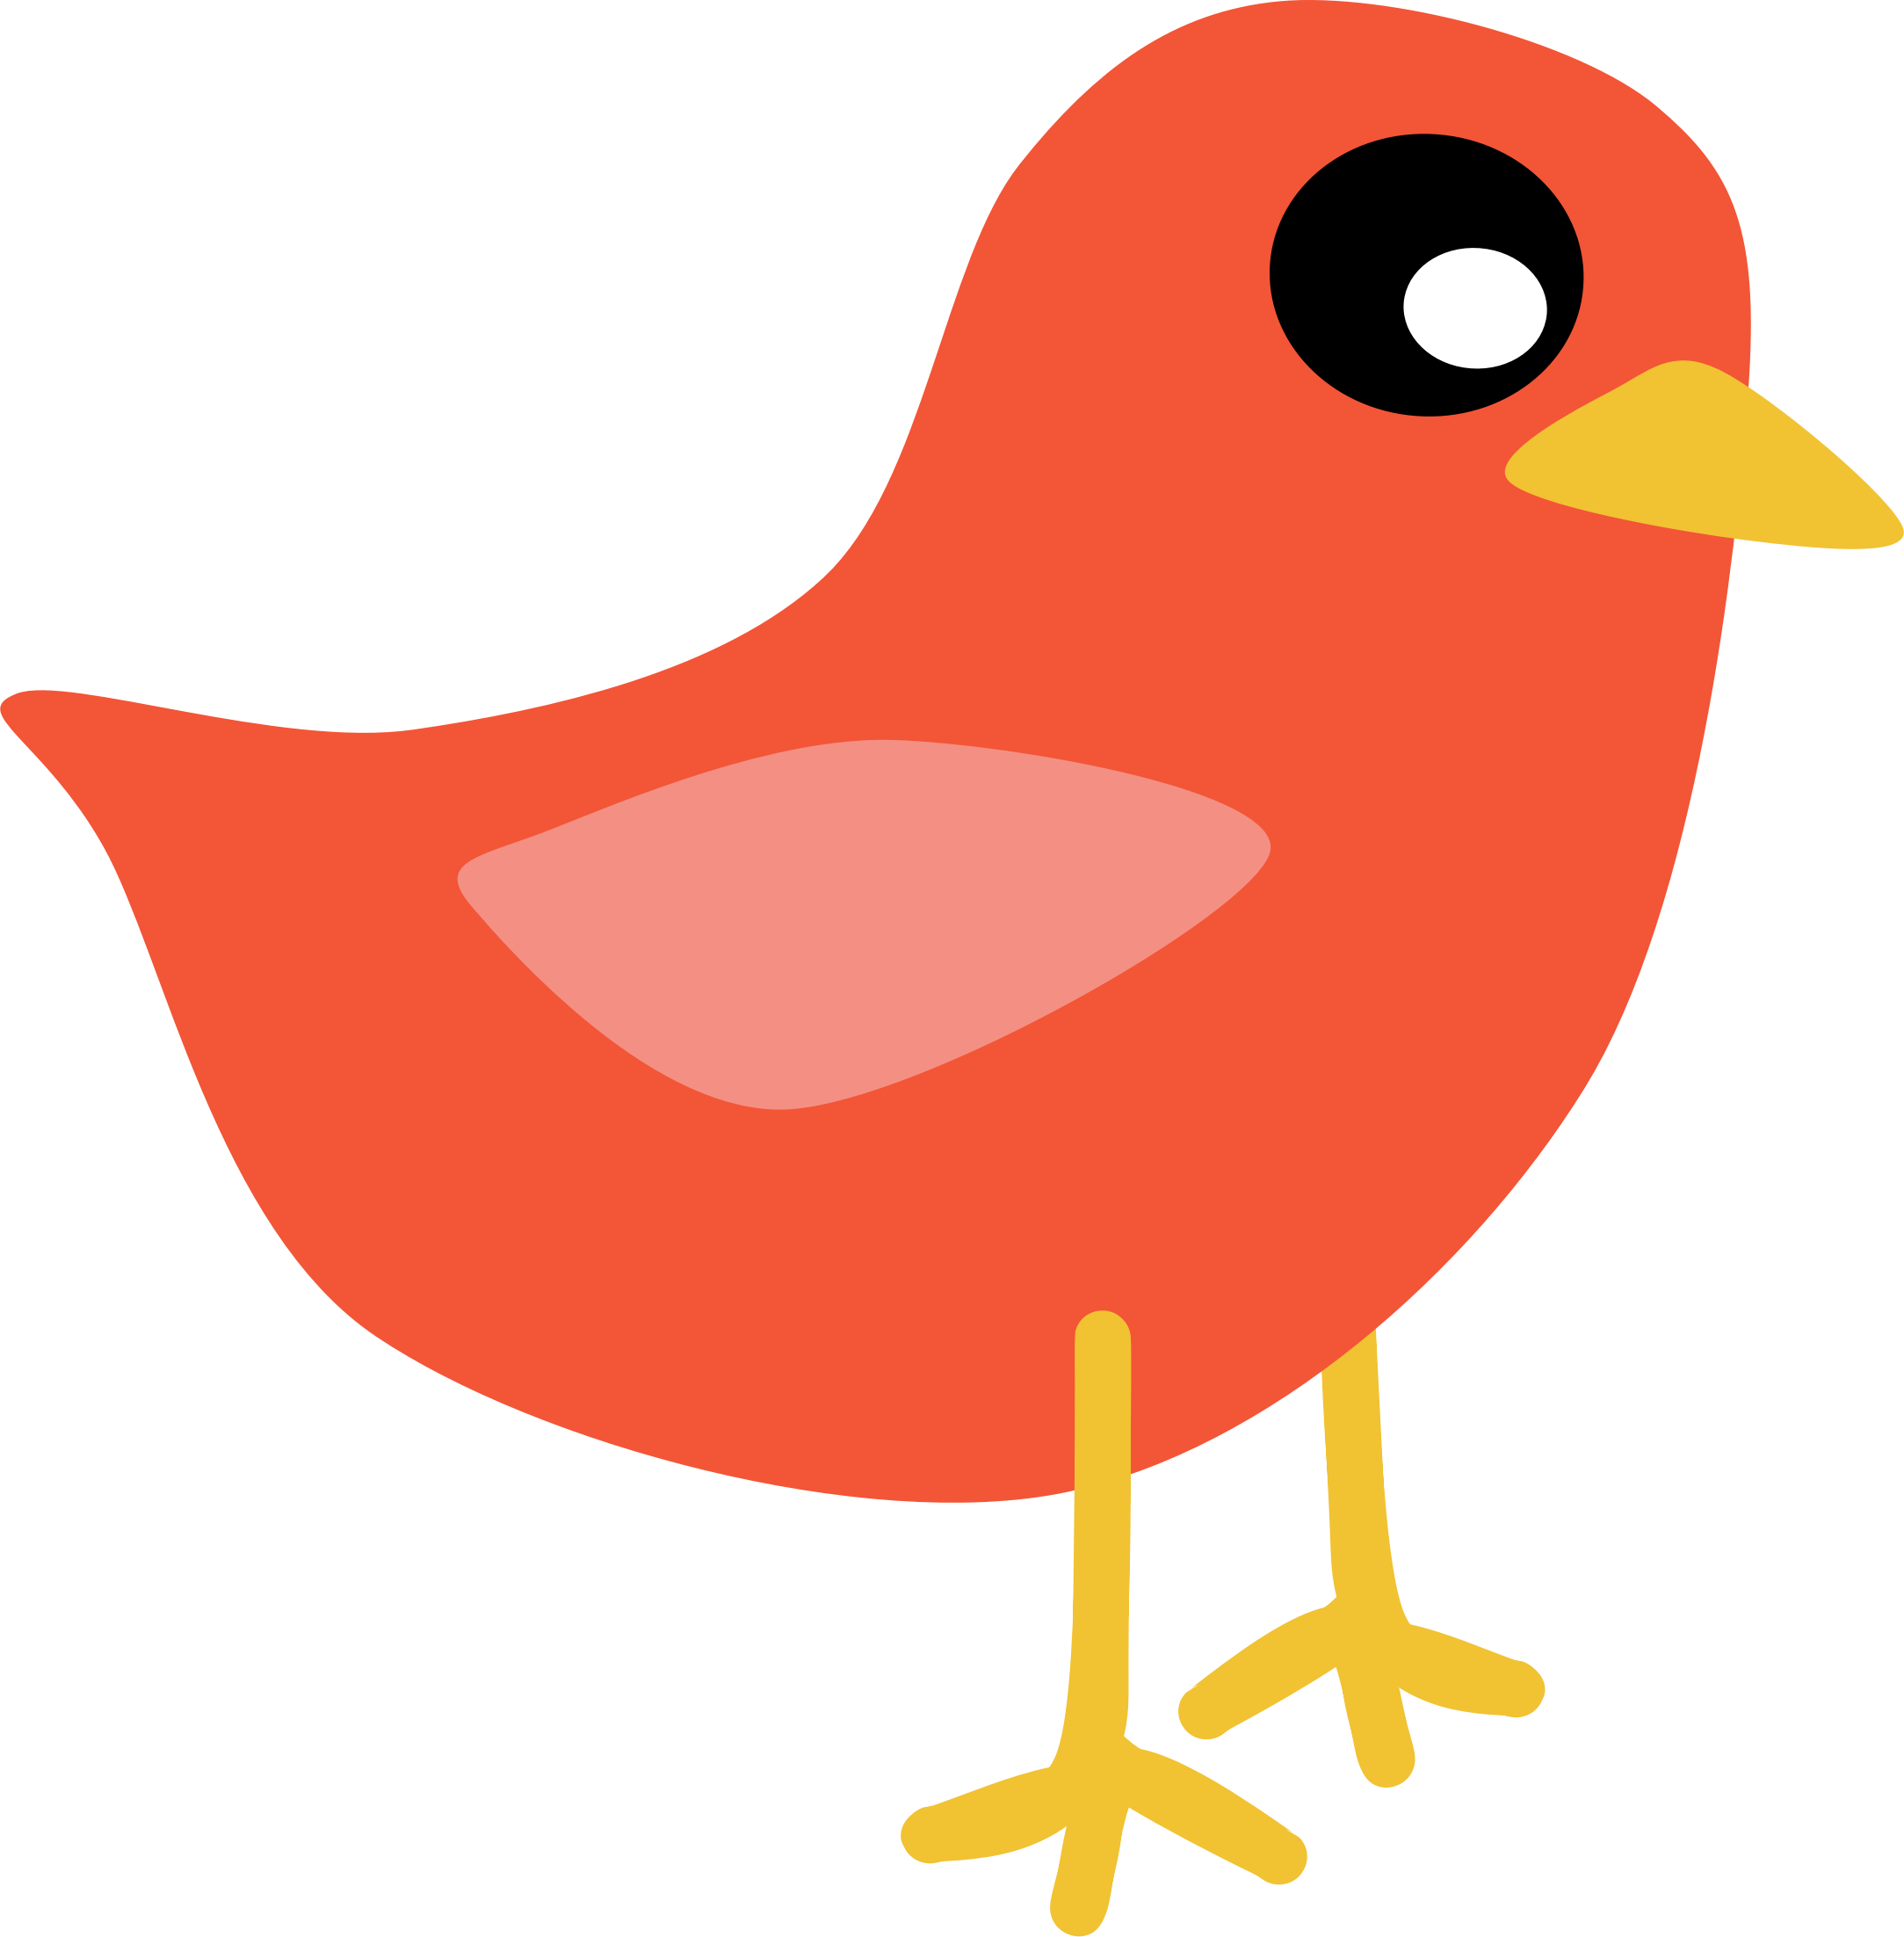 Free Red Bird Silhouette Download Free Clip Art Free Clip Art On Clipart Library